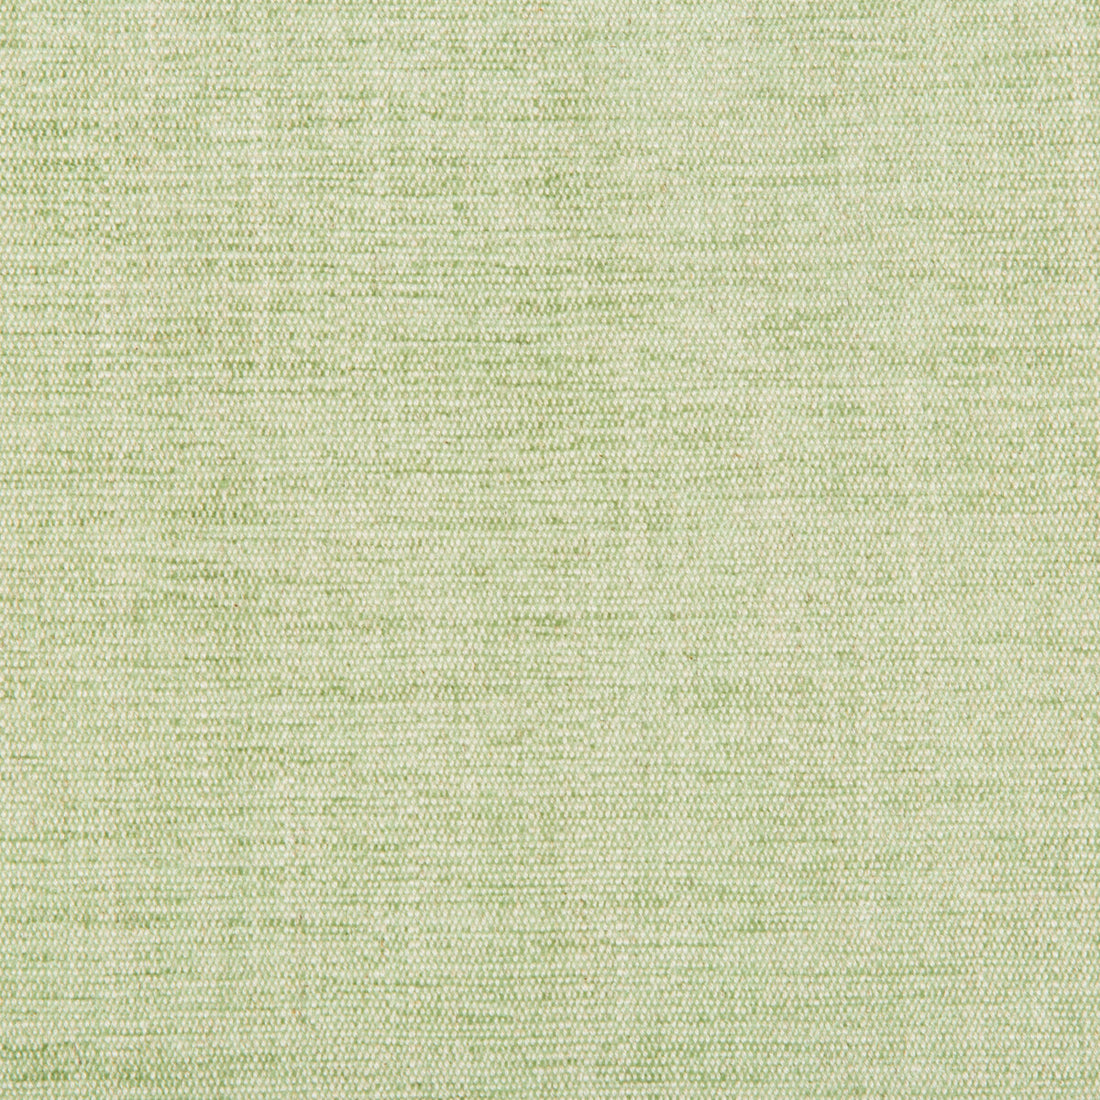 Rutledge fabric in leaf color - pattern 35297.13.0 - by Kravet Basics in the Greenwich collection